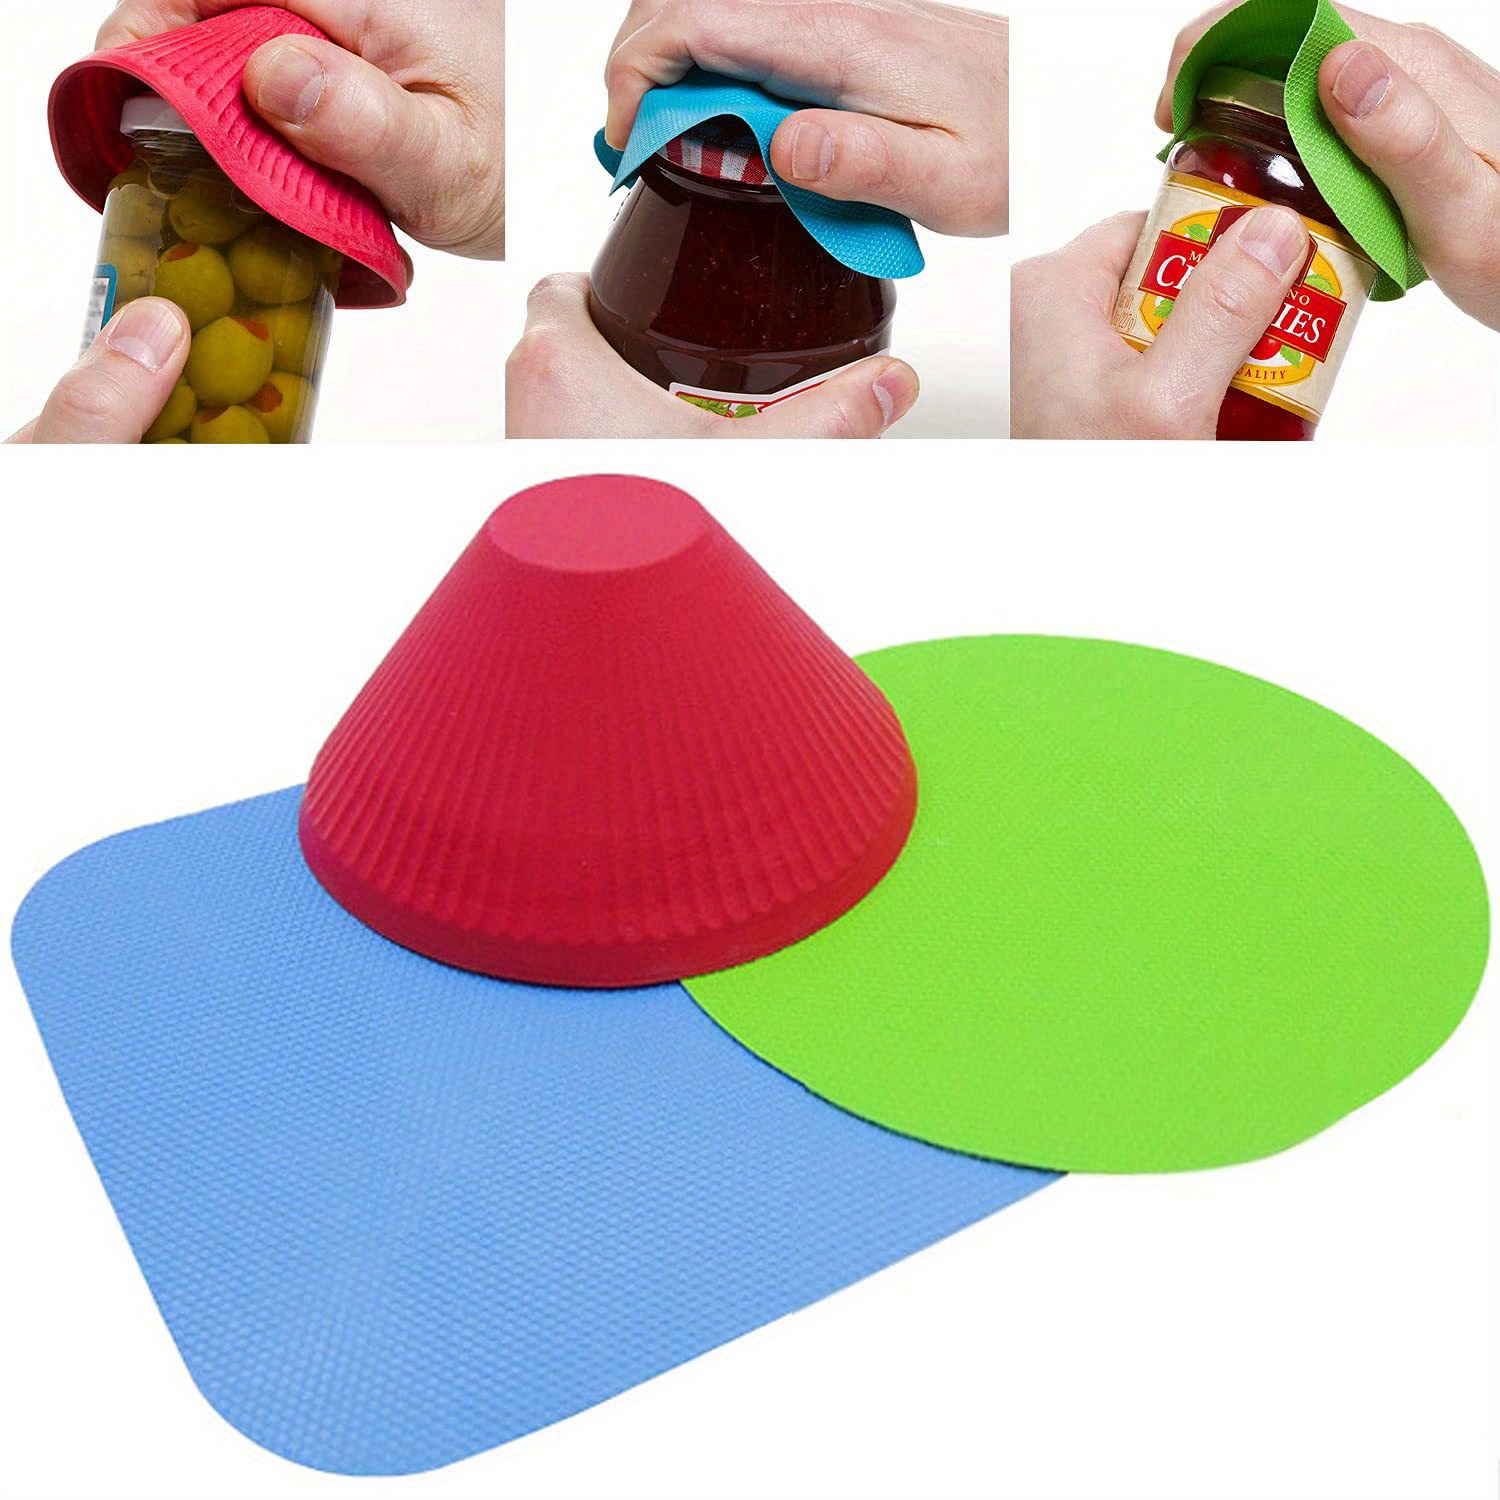 New Silicone Rubber Can Non-Slip Jar Opener Durable Pad Kitchen